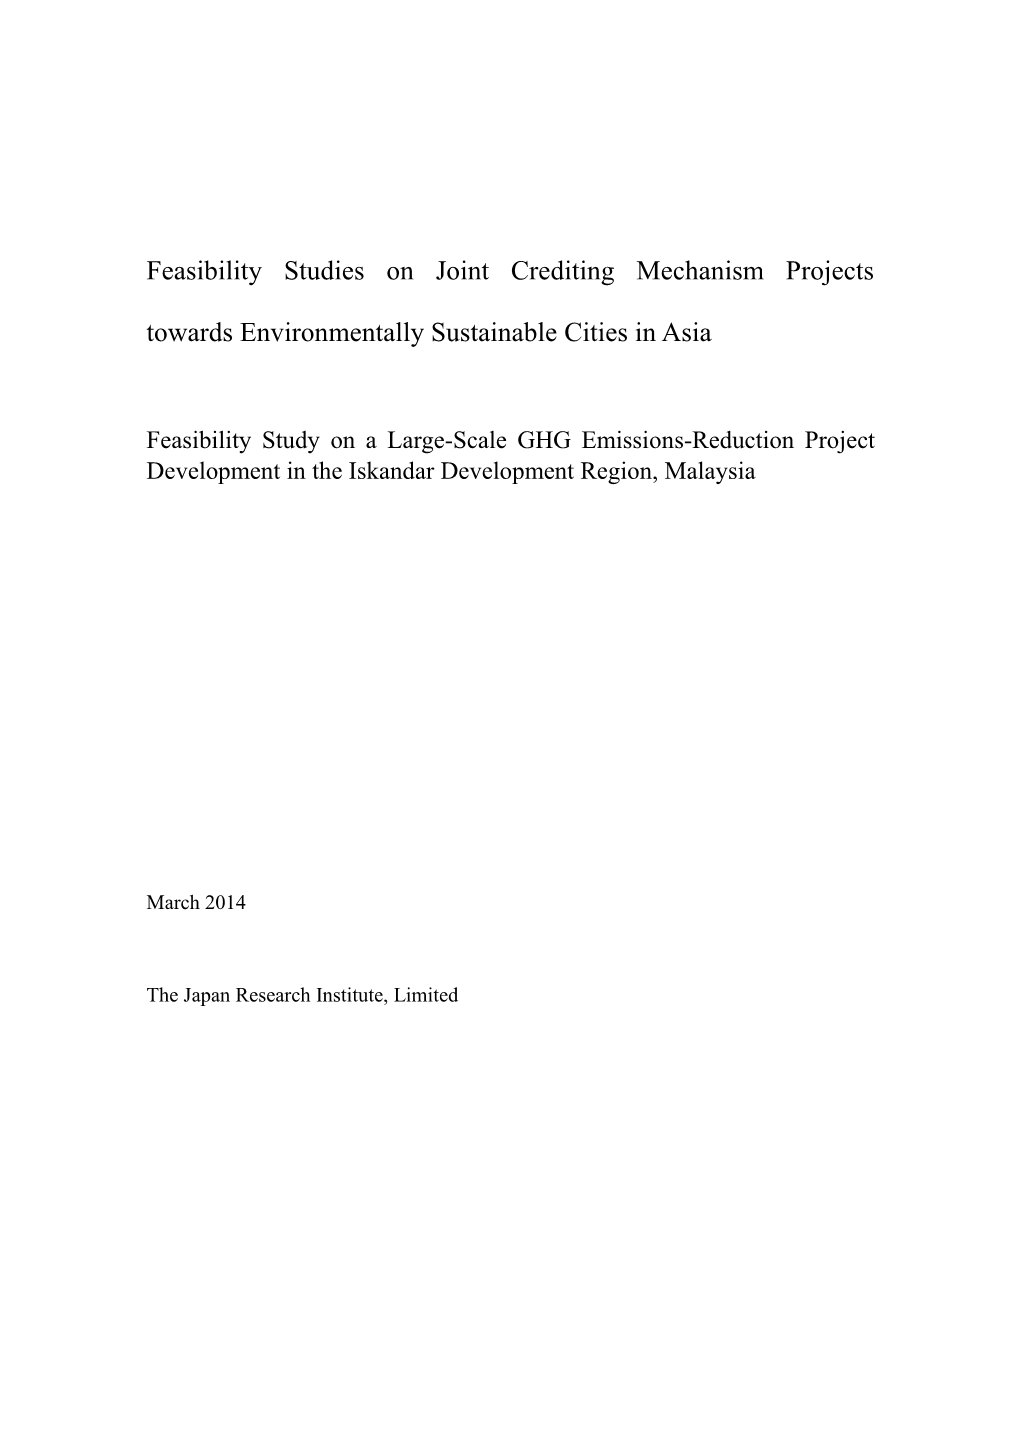 Feasibility Study on Large-Scale GHG Emission-Reduction Project